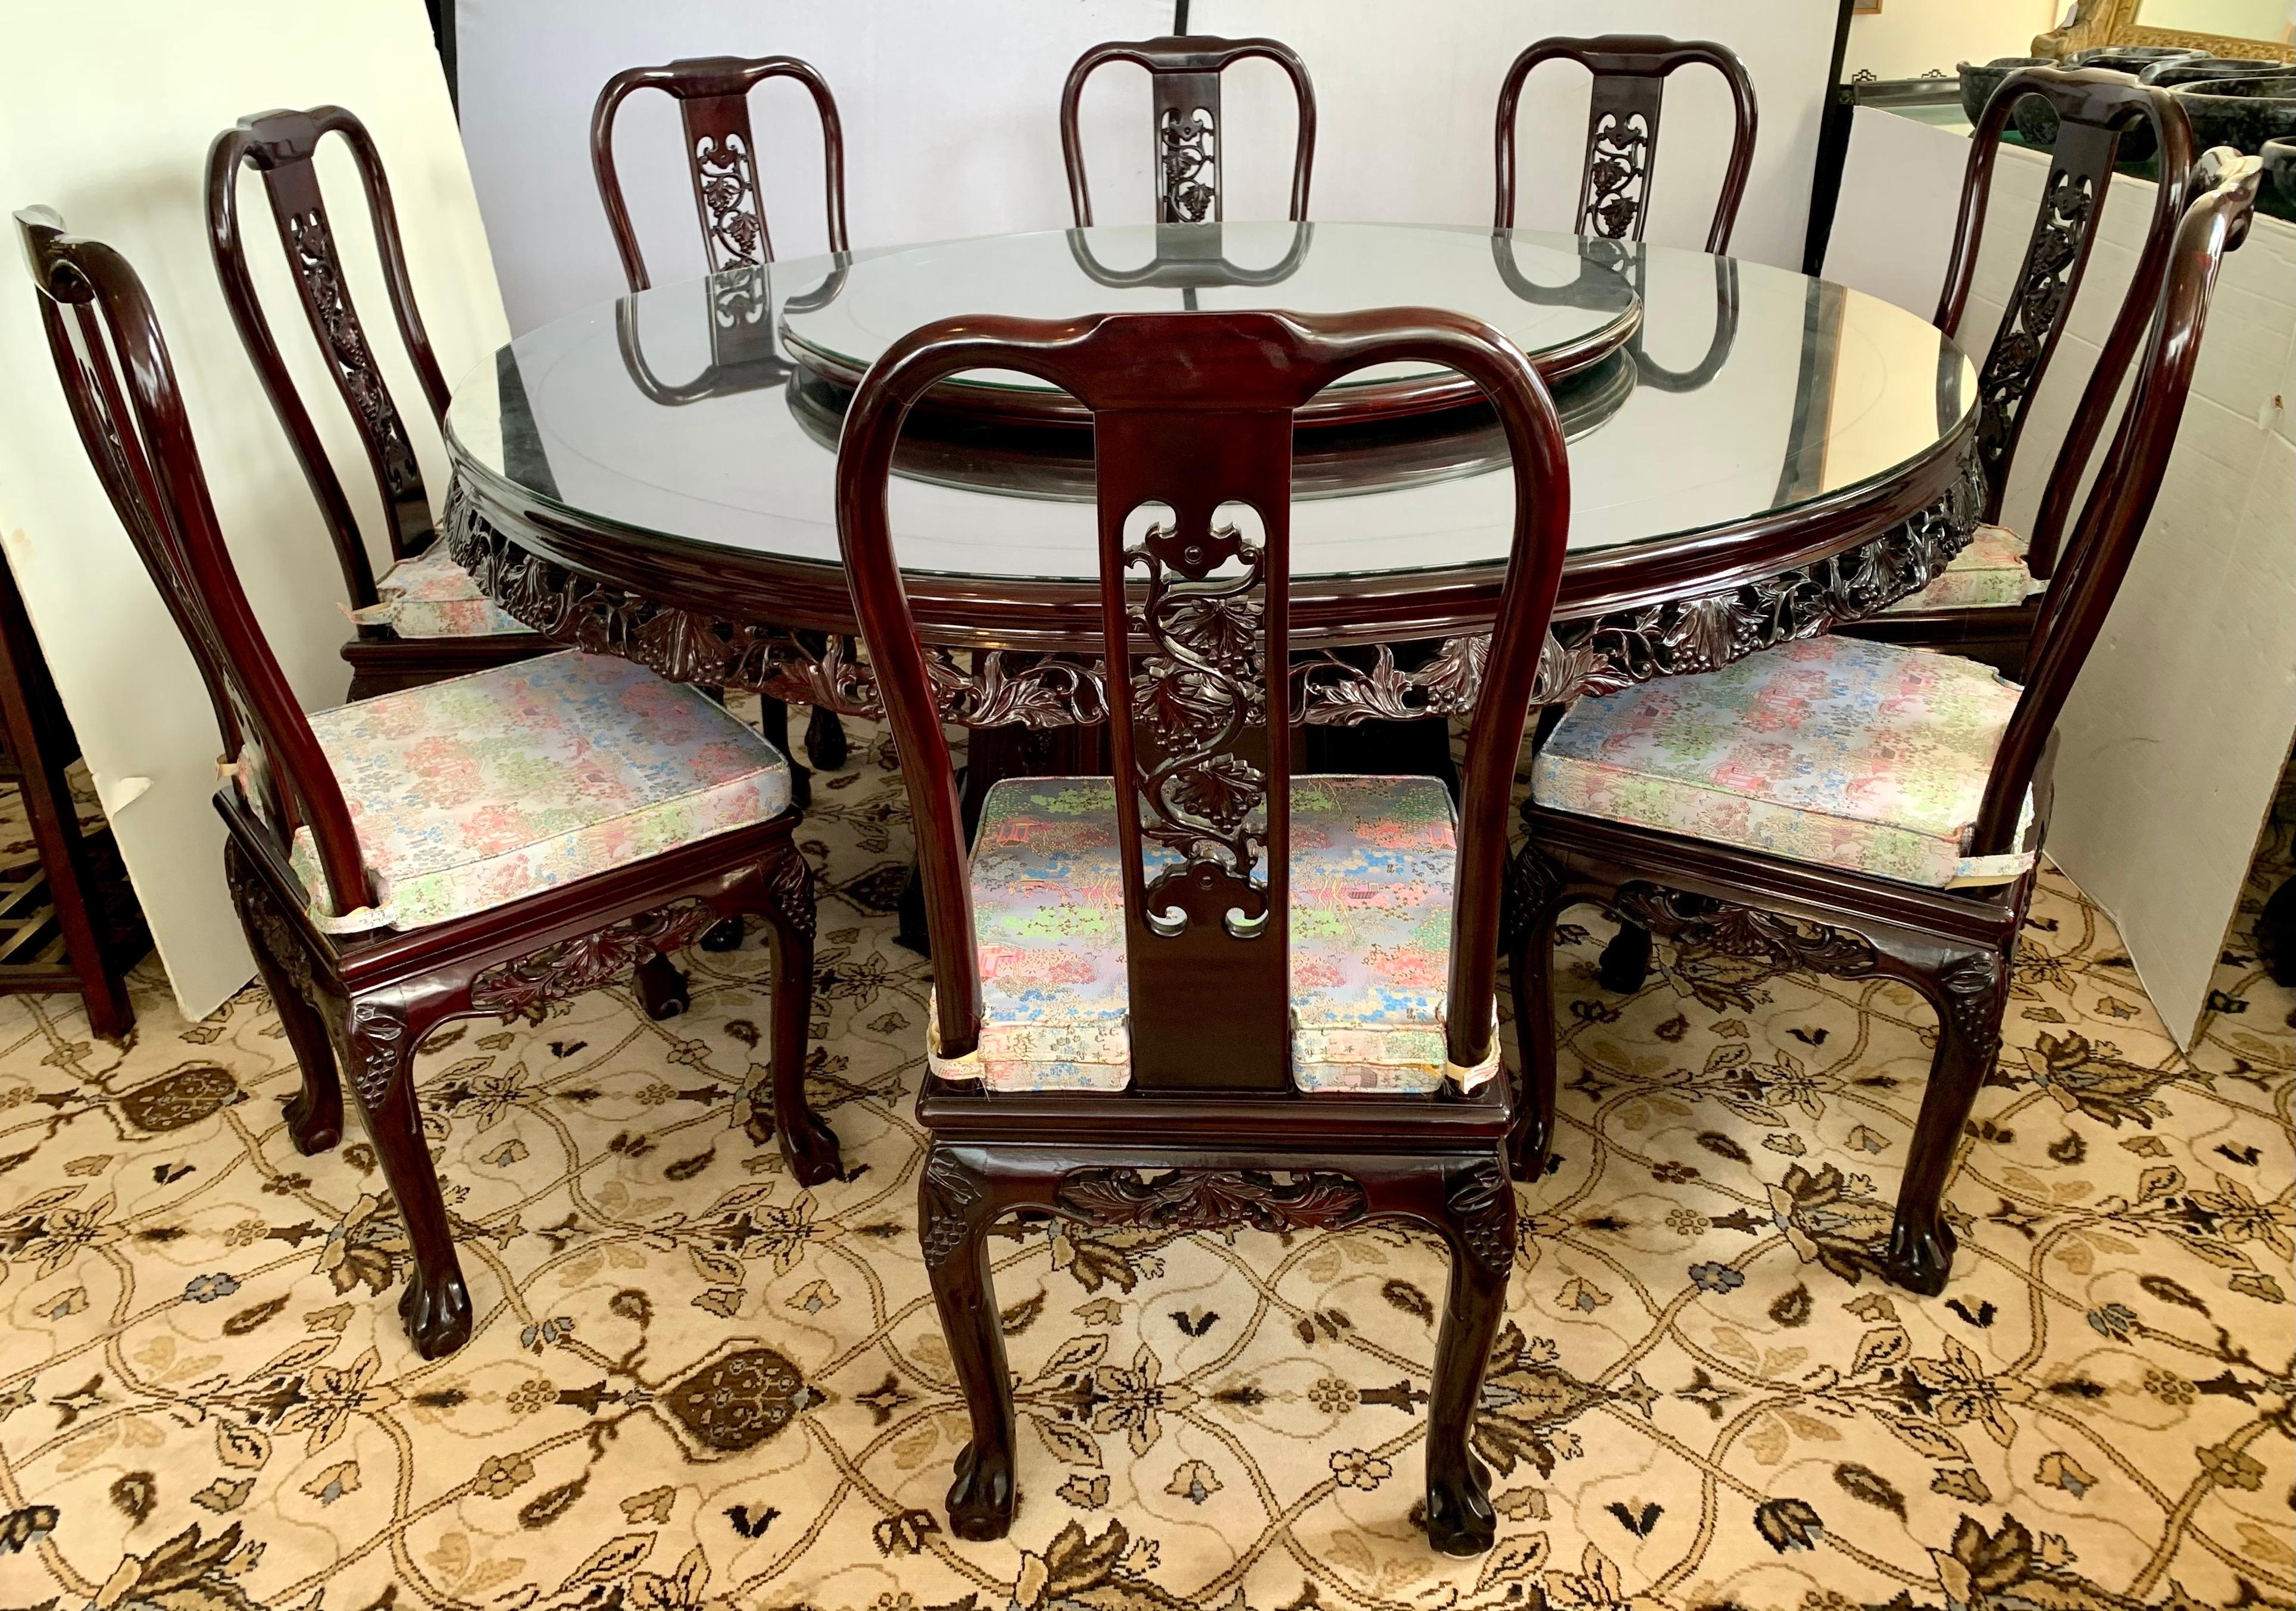 Magnificent Chinese rosewood carved dining room set which features a hand carved grapes and vines all around the apron and pedestal of the table. It also has a 